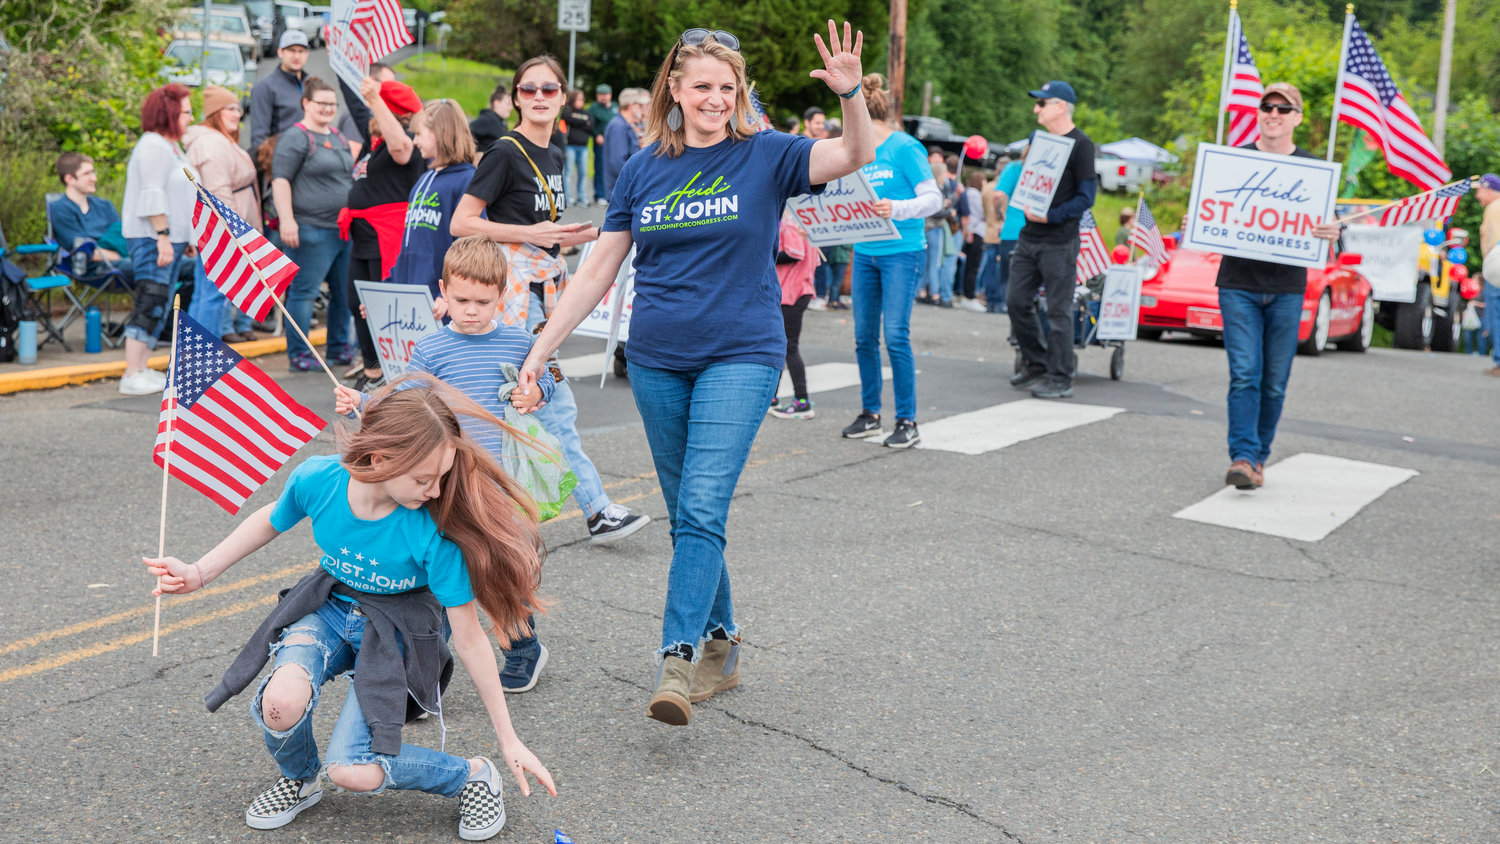 Heidi St. John smiles and waves alongside sign holders during the Egg Days Festival parade in Winlock on Saturday.